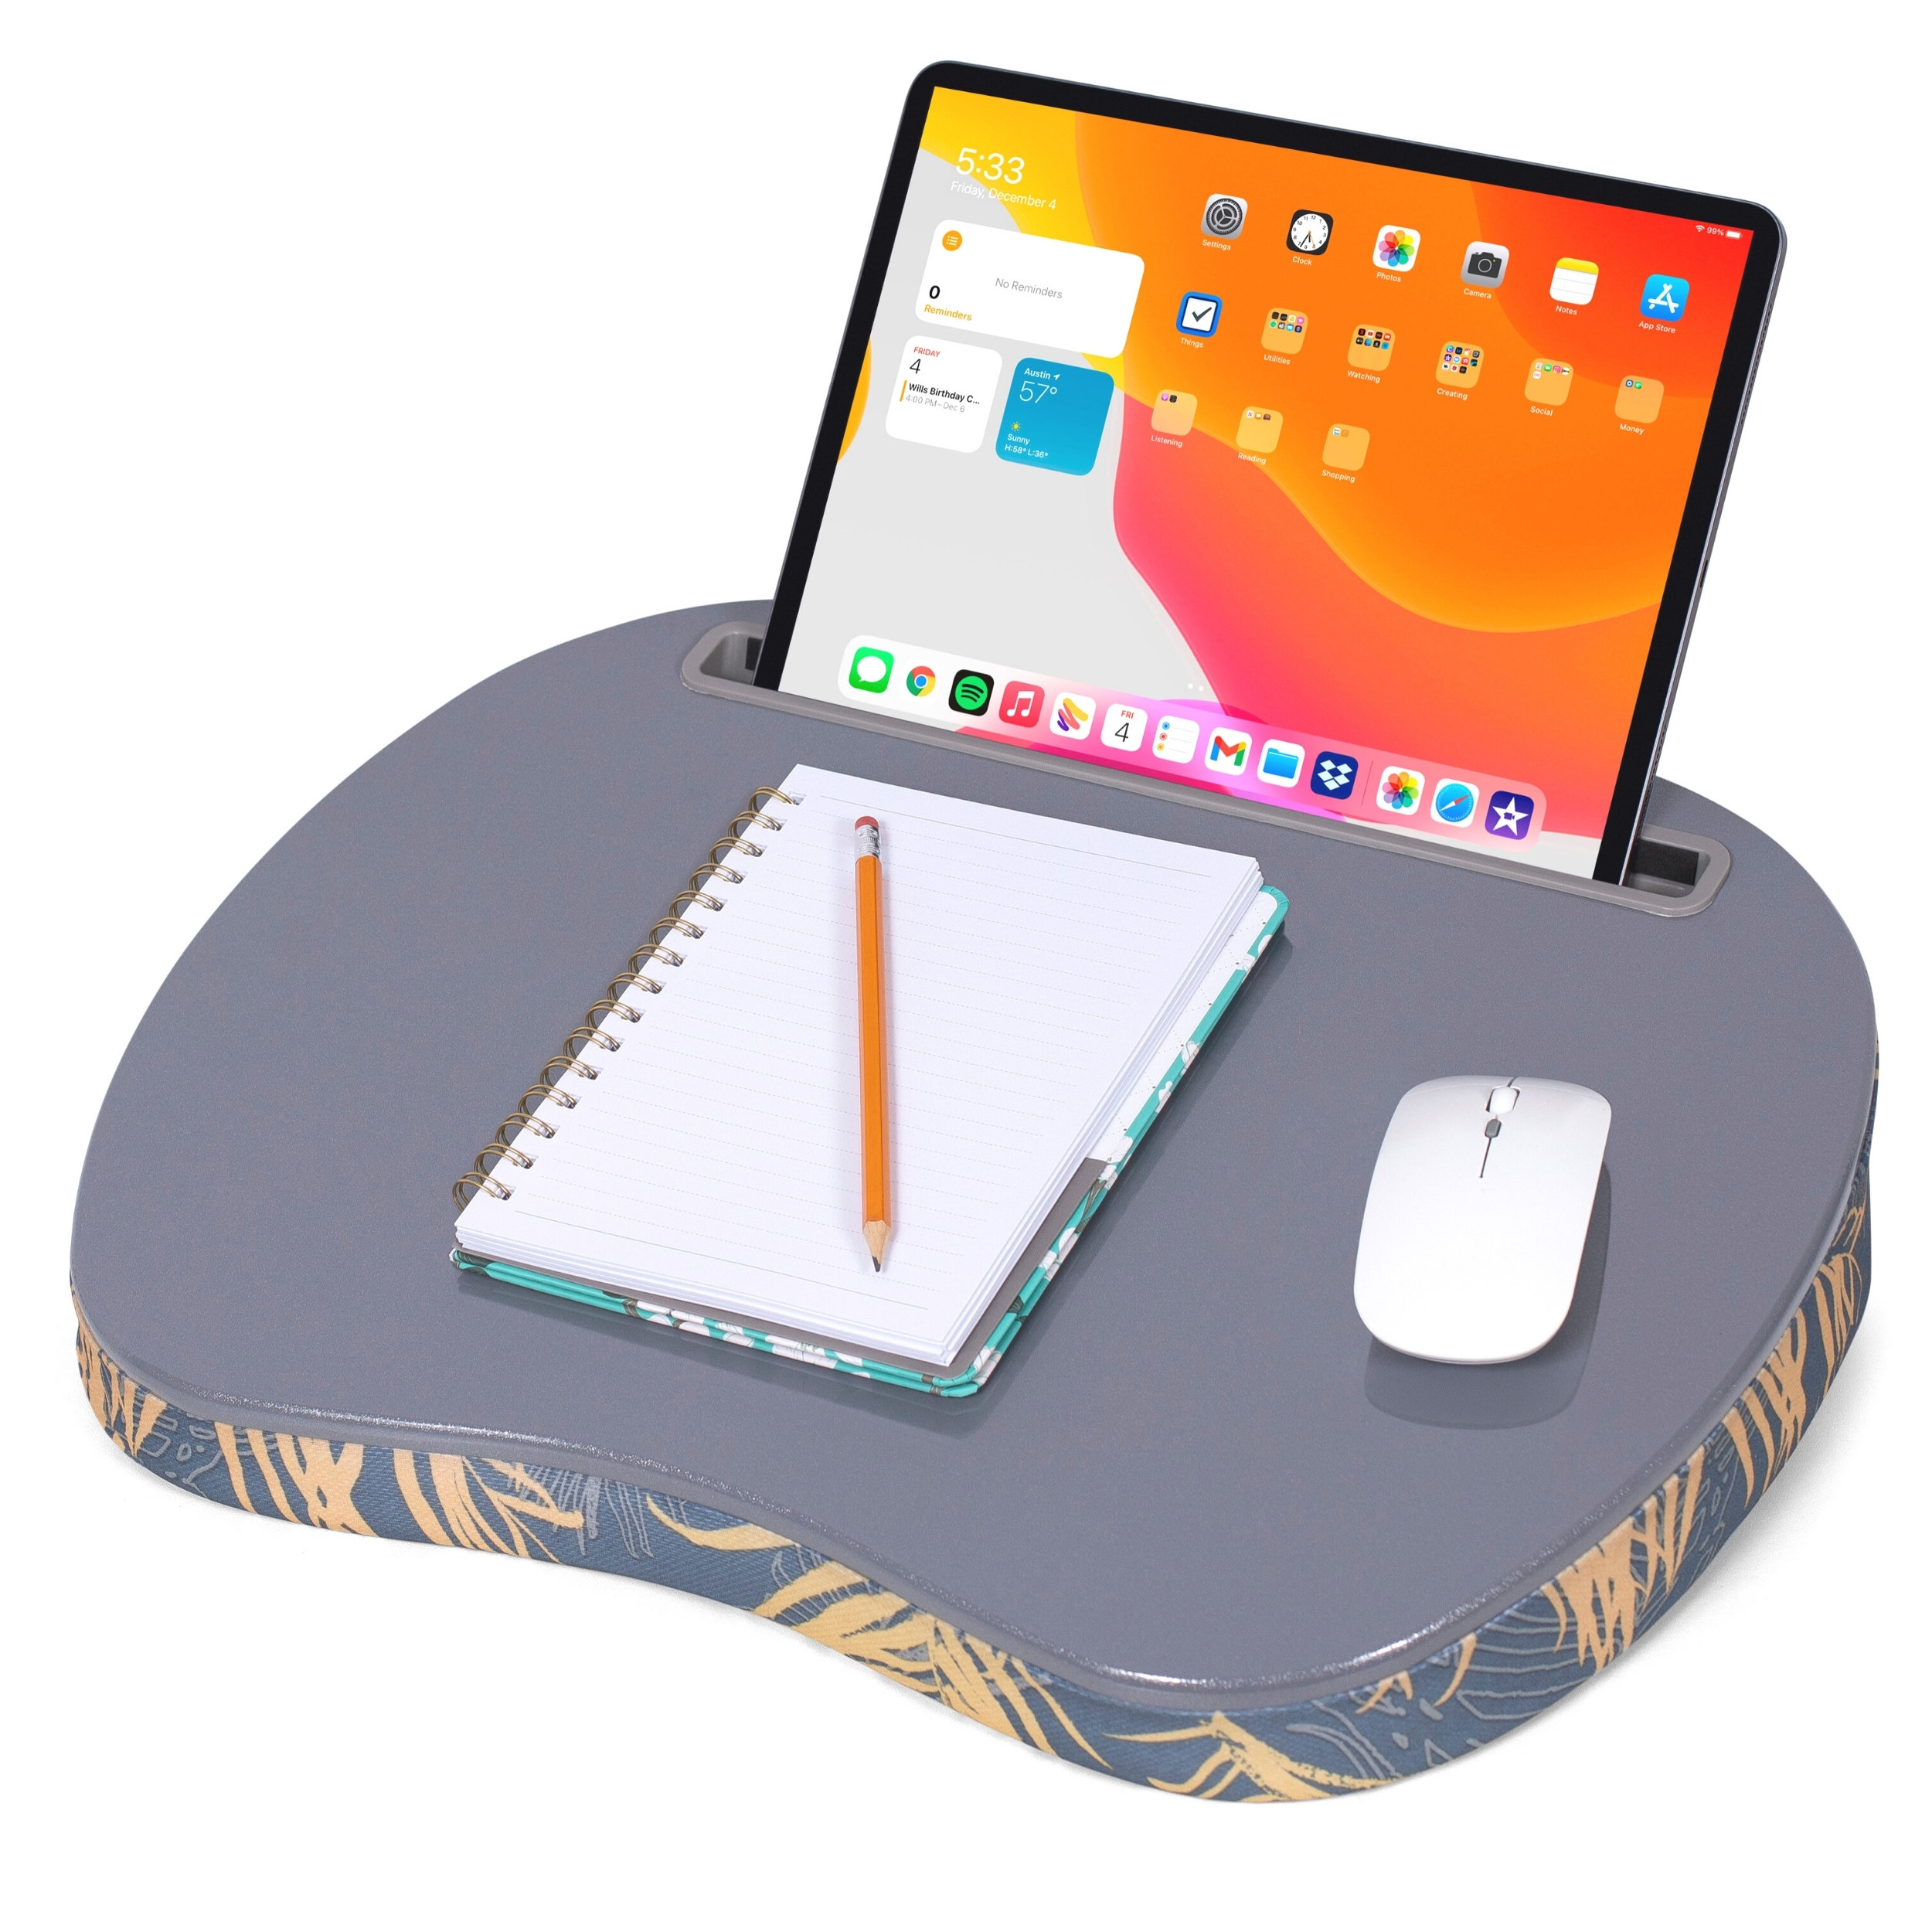 pianist Regenboog Ramkoers Sofia + Sam Lap Desk For Laptop And Writing - Tropical Grey - Laptop Stand  Accessories - Home Office Tray - Work From Home - Car Sofa Chair Couch  Portable Desk - Pillow - Tablet Slot | Wayfair